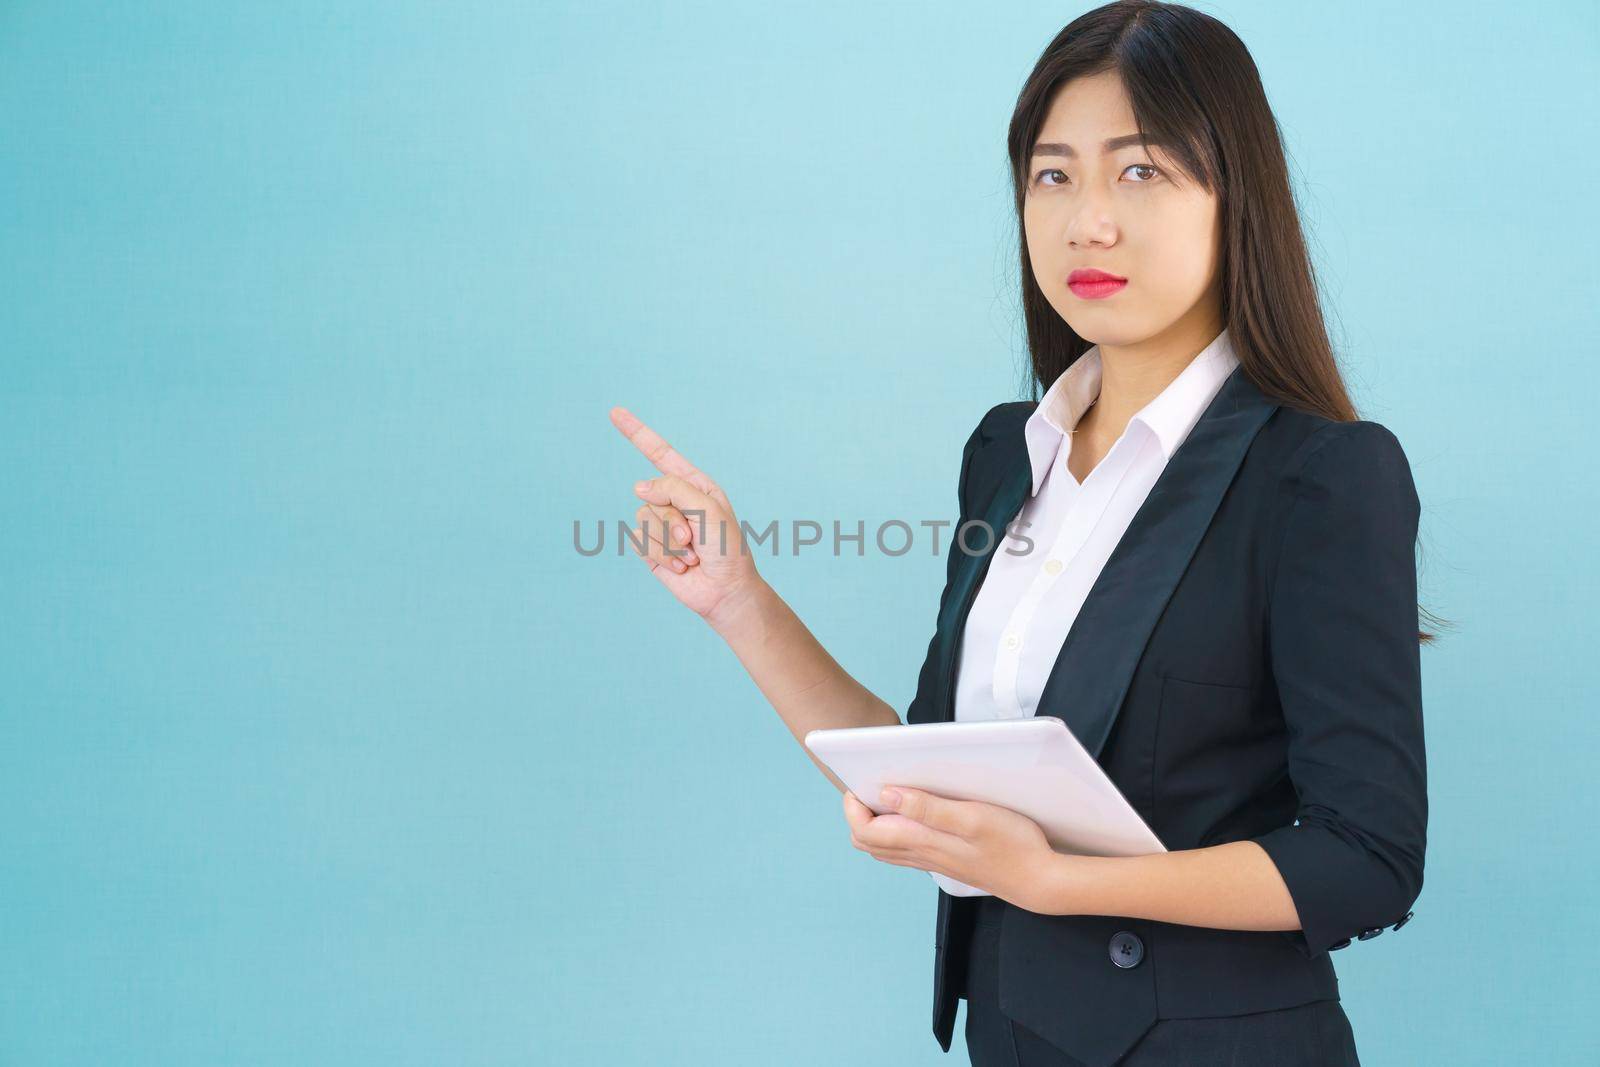 Asain women in suit standing using digital tablet and pointing finger  by stoonn